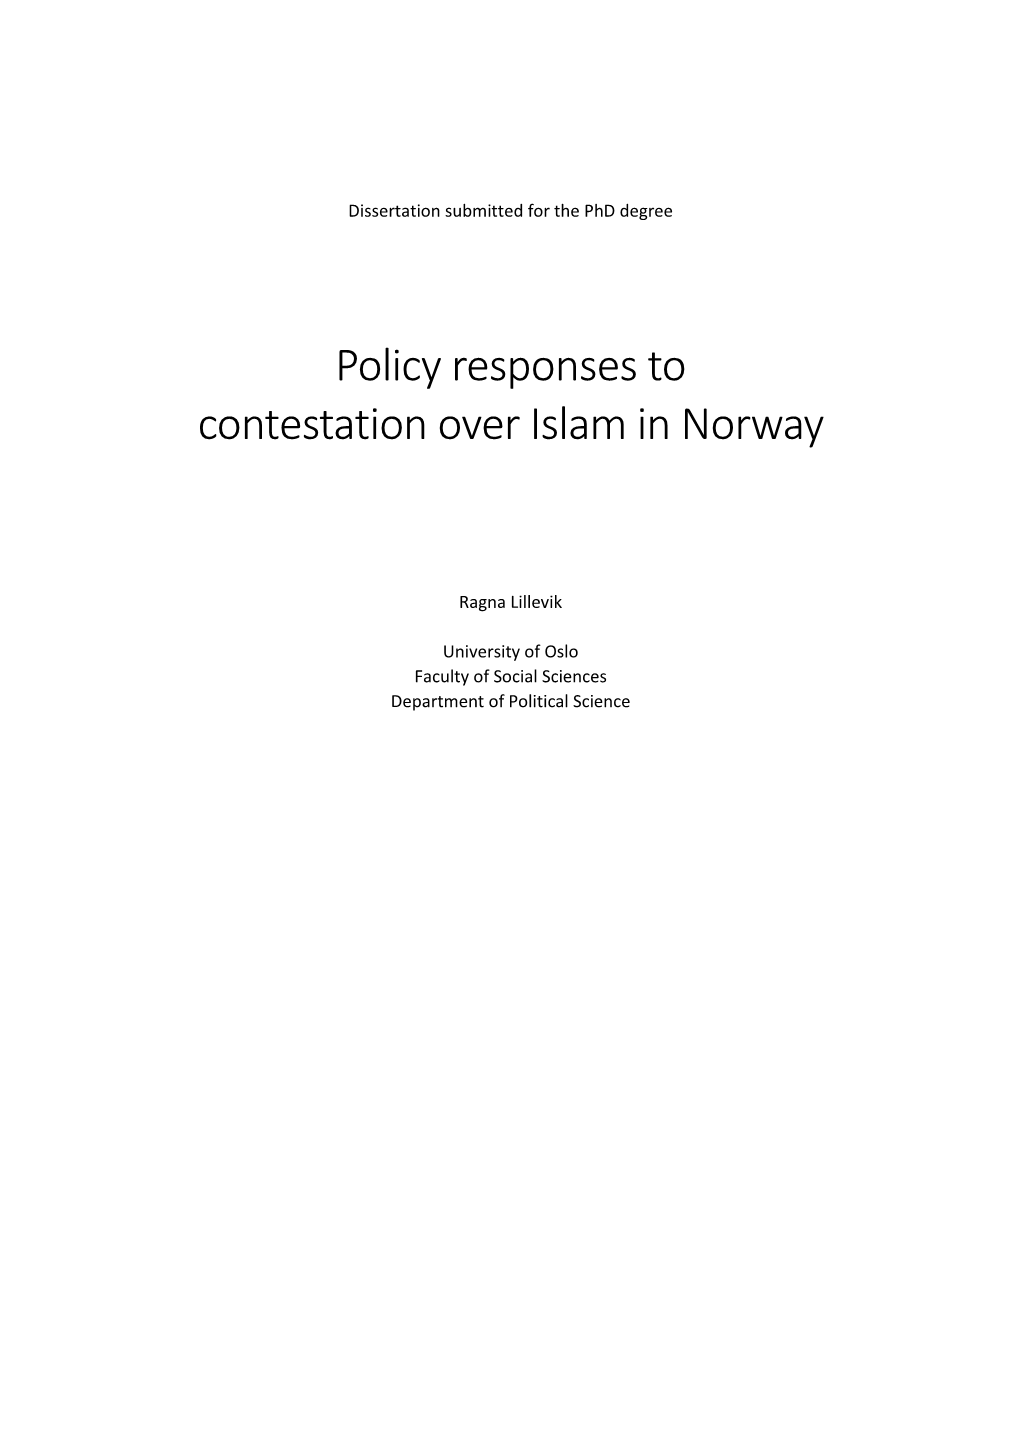 Policy Responses to Contestation Over Islam in Norway